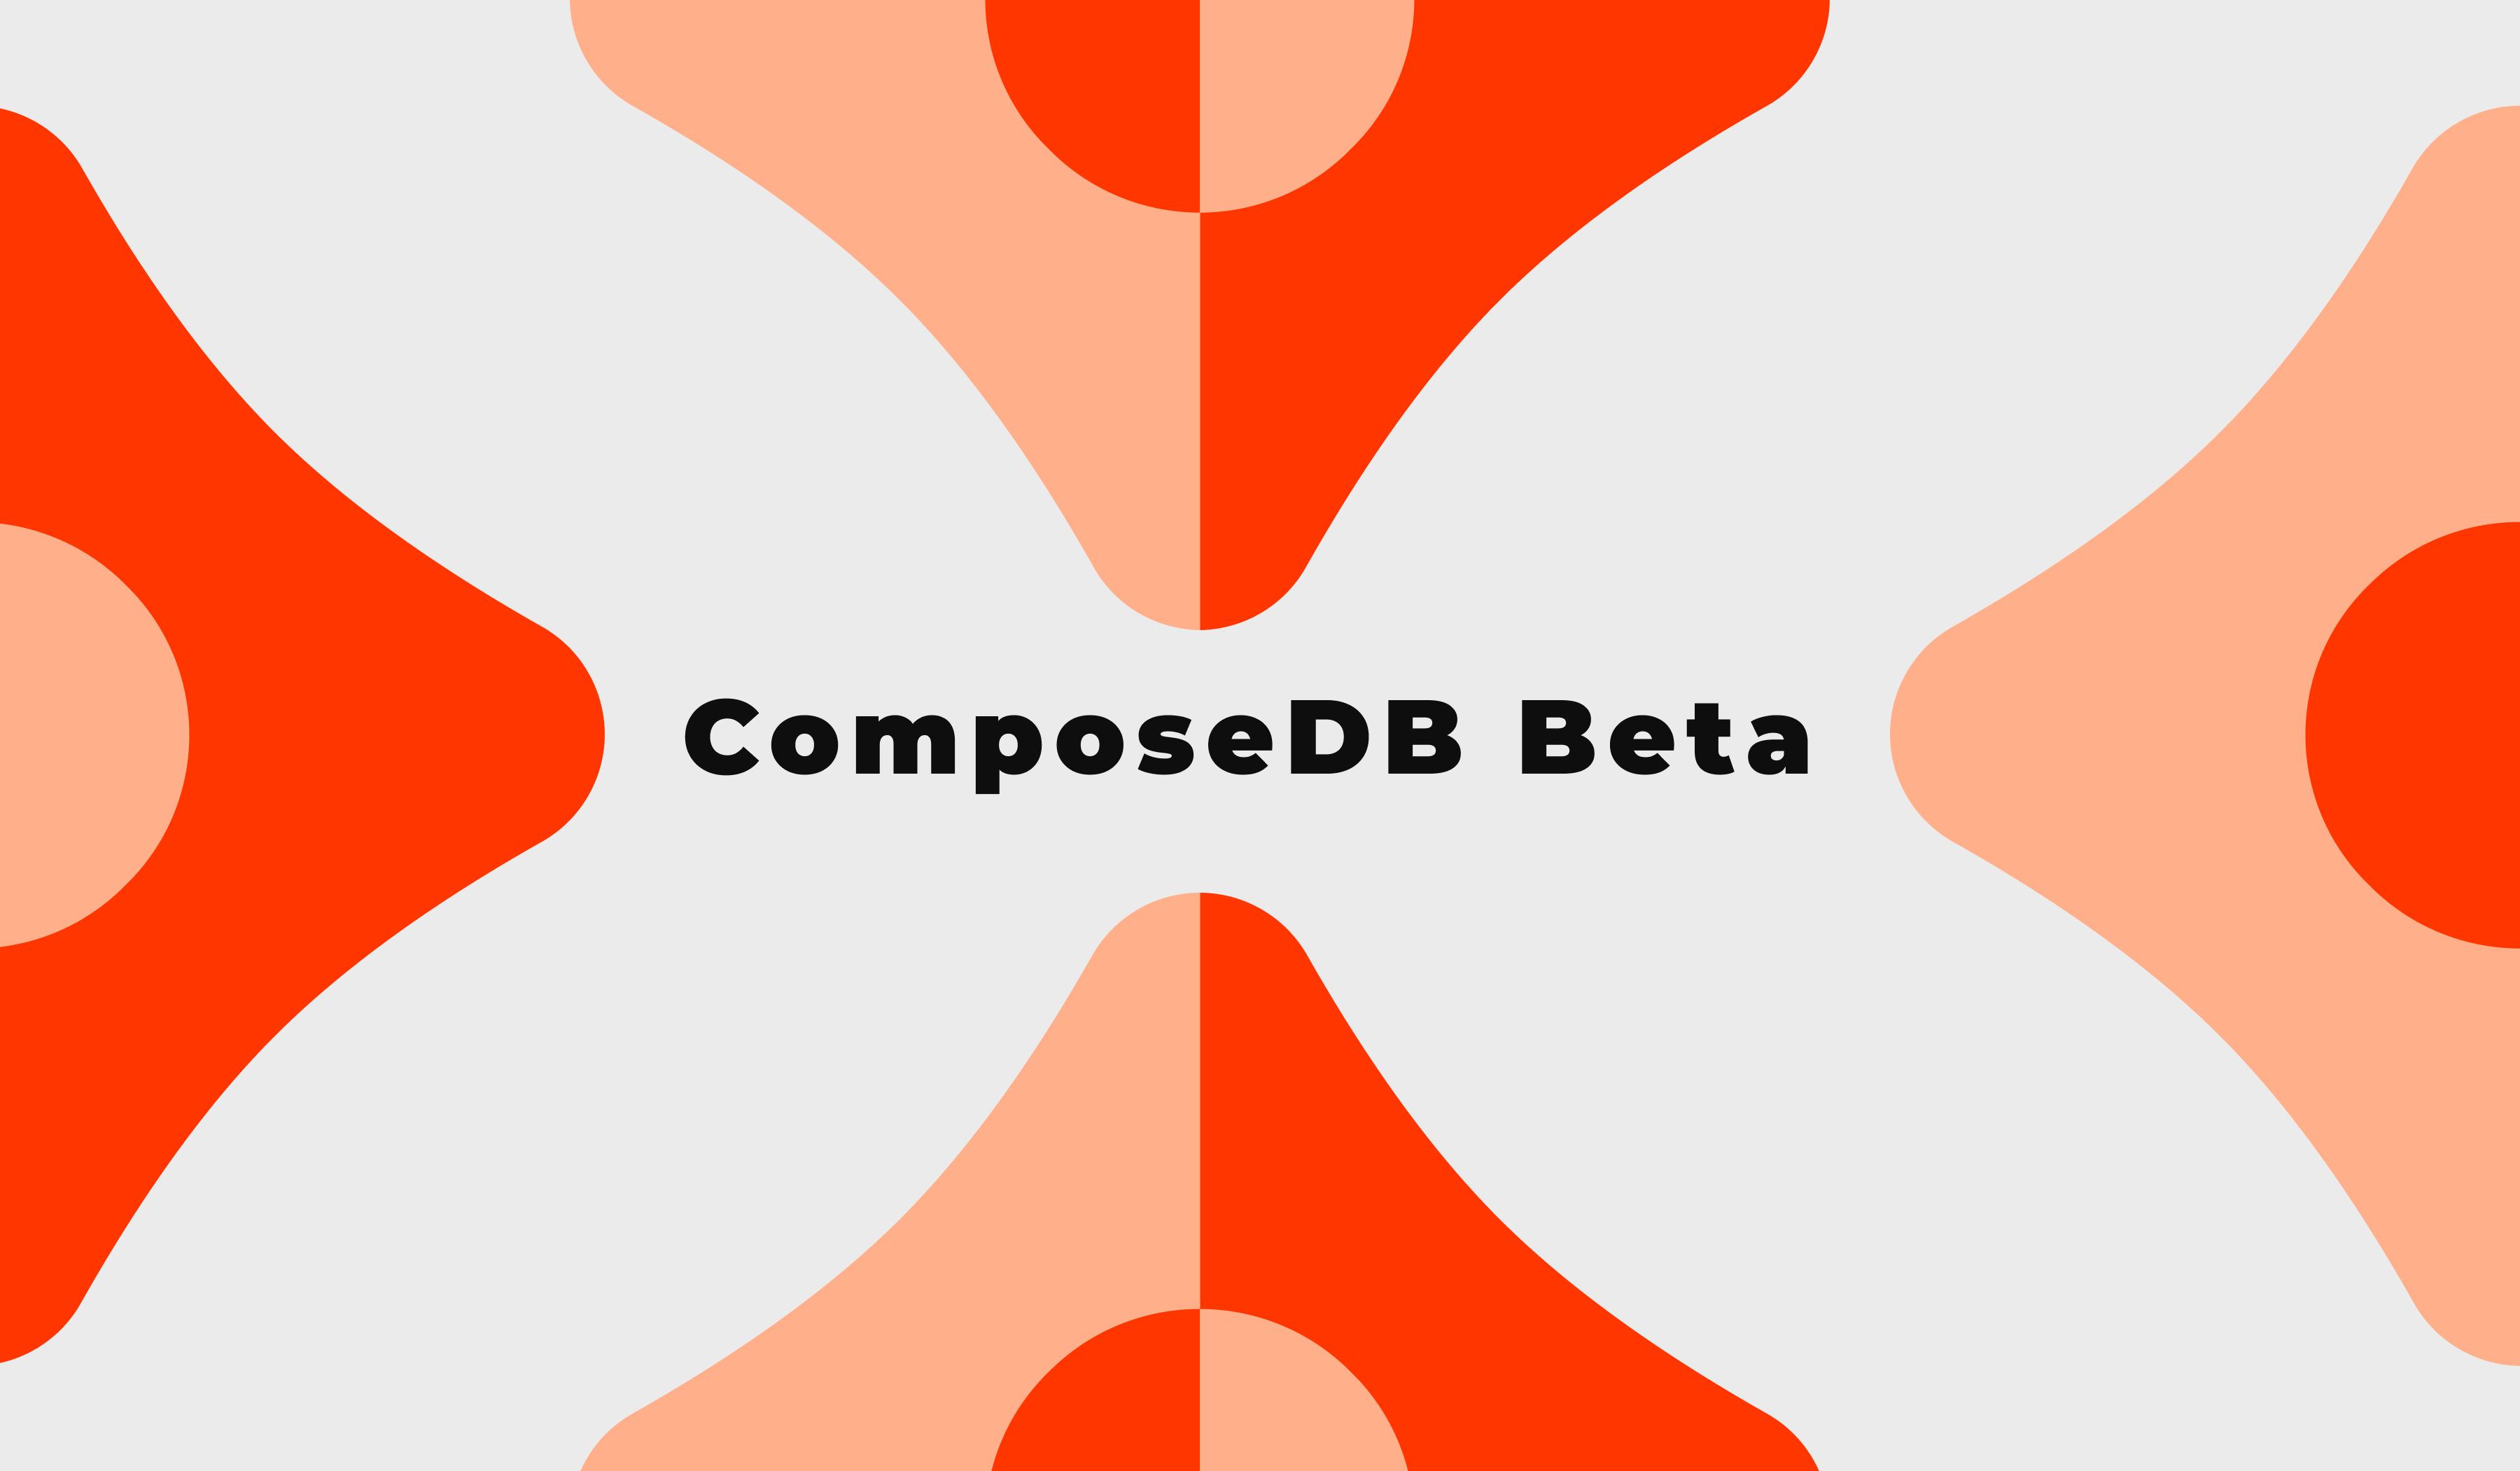 Are you ready for the Beta release of ComposeDB on Ceramic?